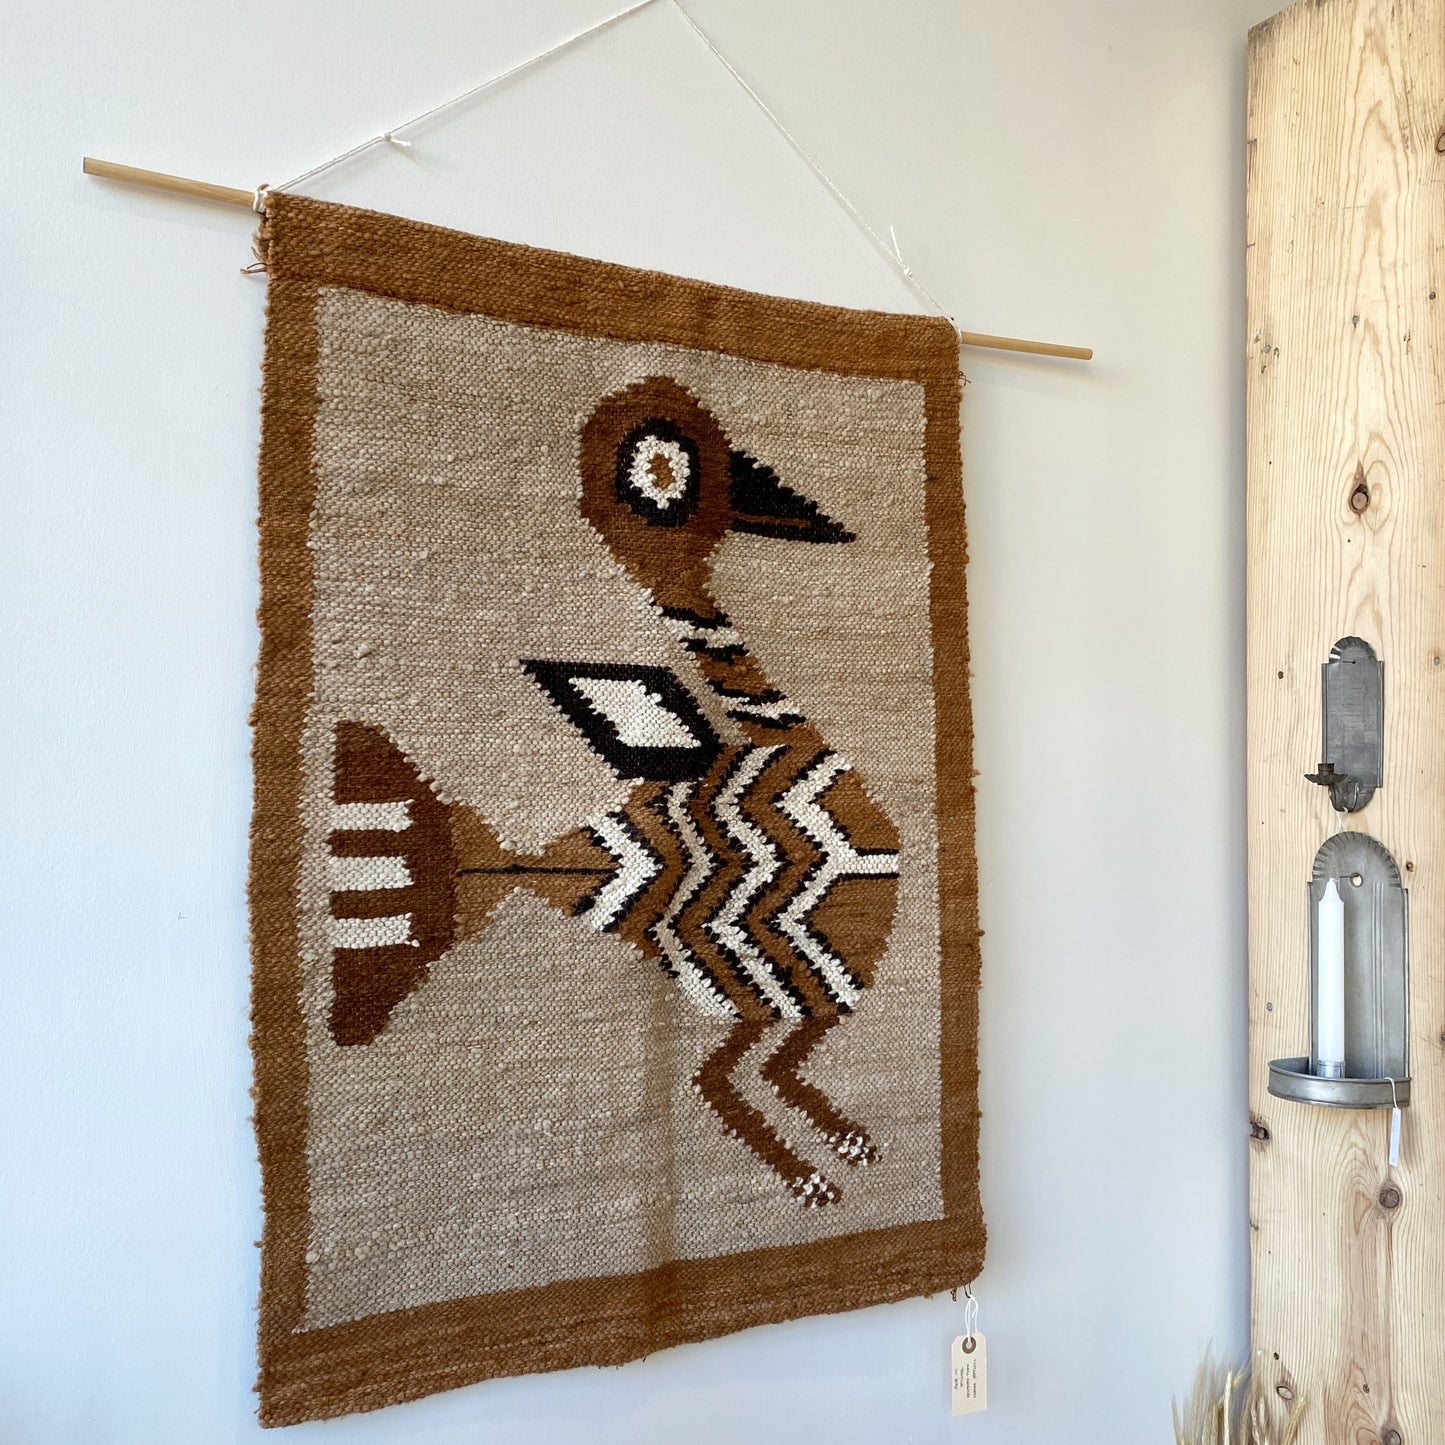 Vintage Woven Wall Hanging / Textile with Bird